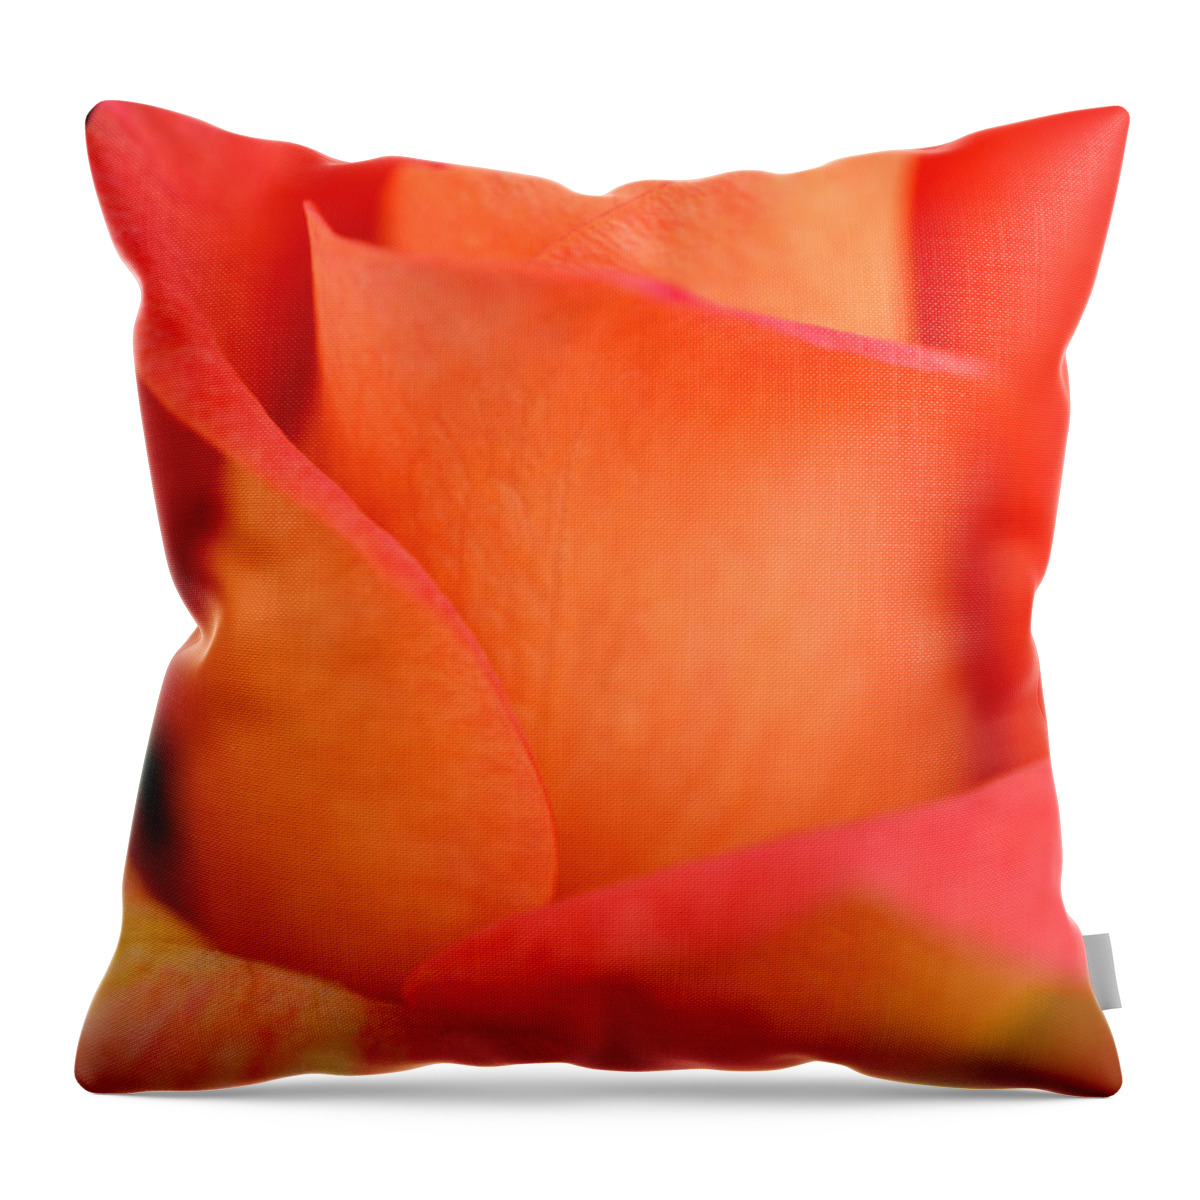 Rose Throw Pillow featuring the photograph Unique by Deb Halloran